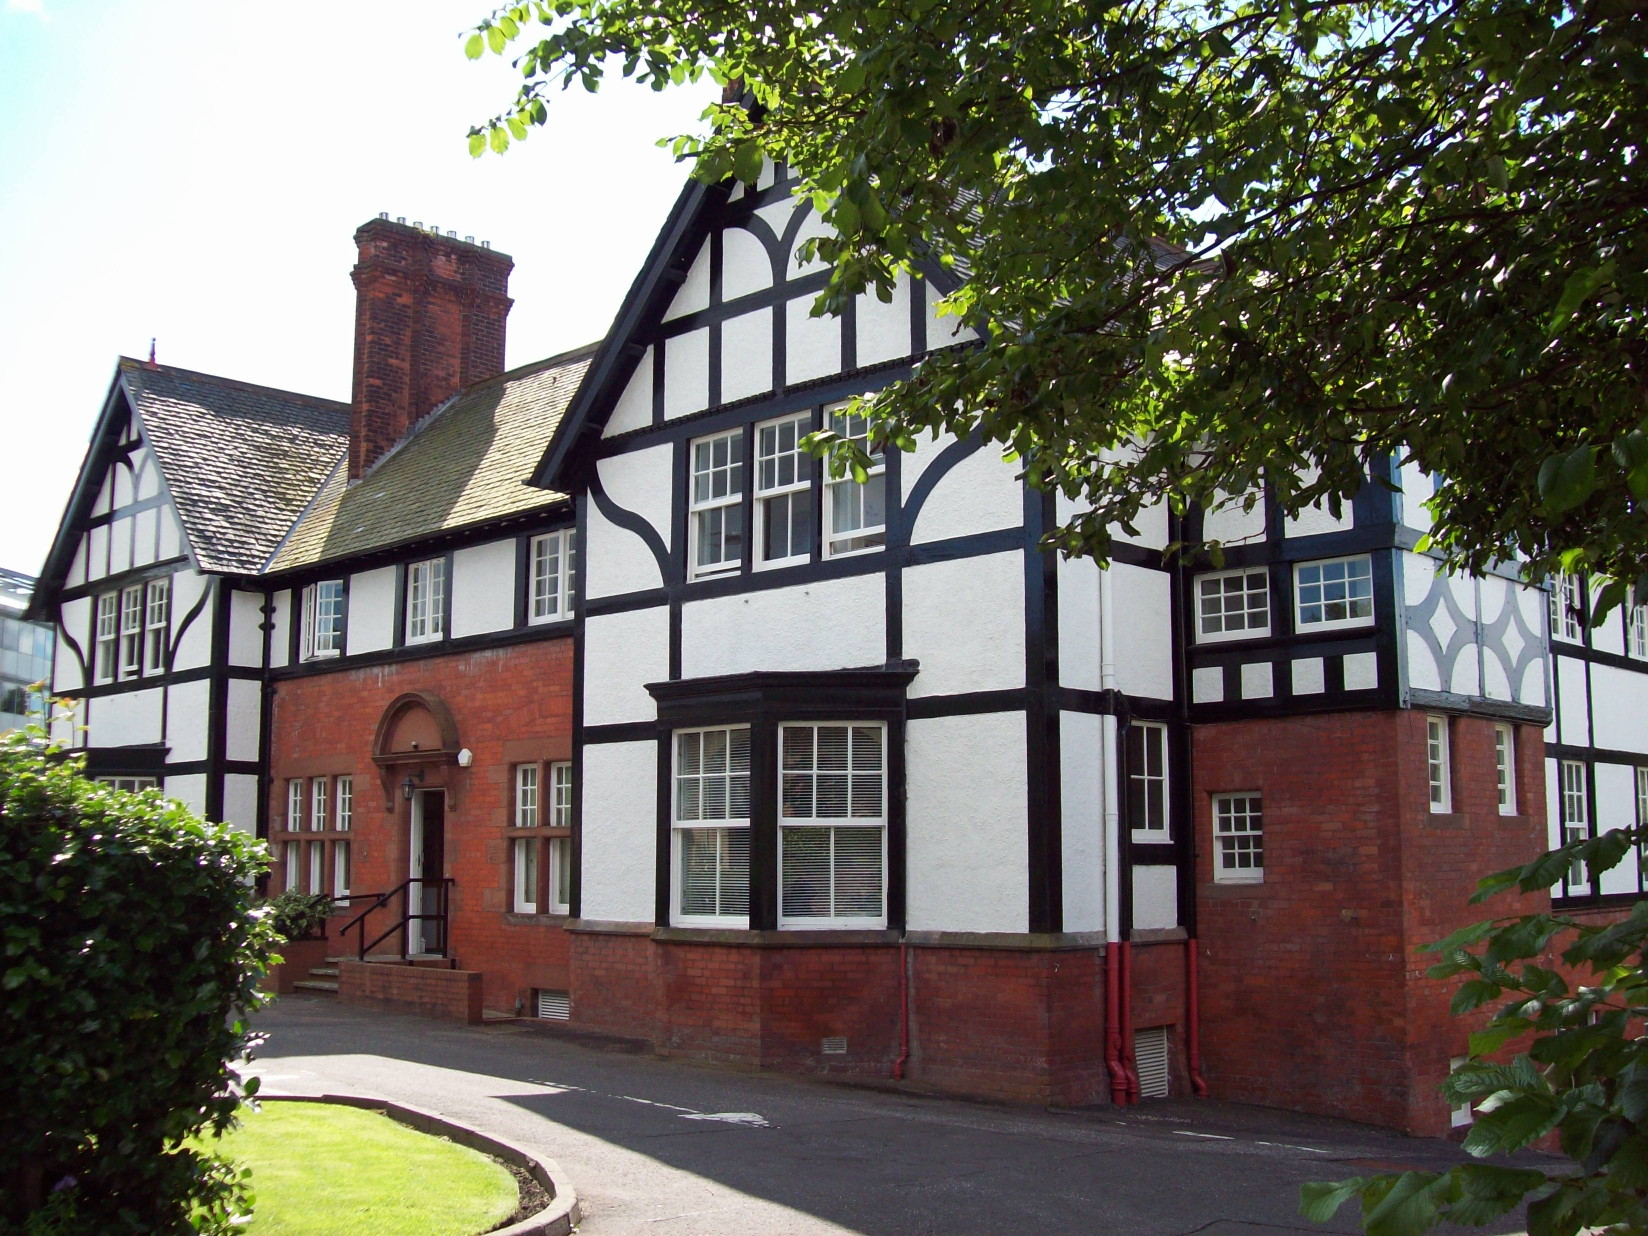 large mock-Tudor building having an end-on, black and white gable-end section to ether side and in the middle a red brick stretch with high chimneys and a band of black and white along the upper floor, all set in extensive grounds with a high hedge in front